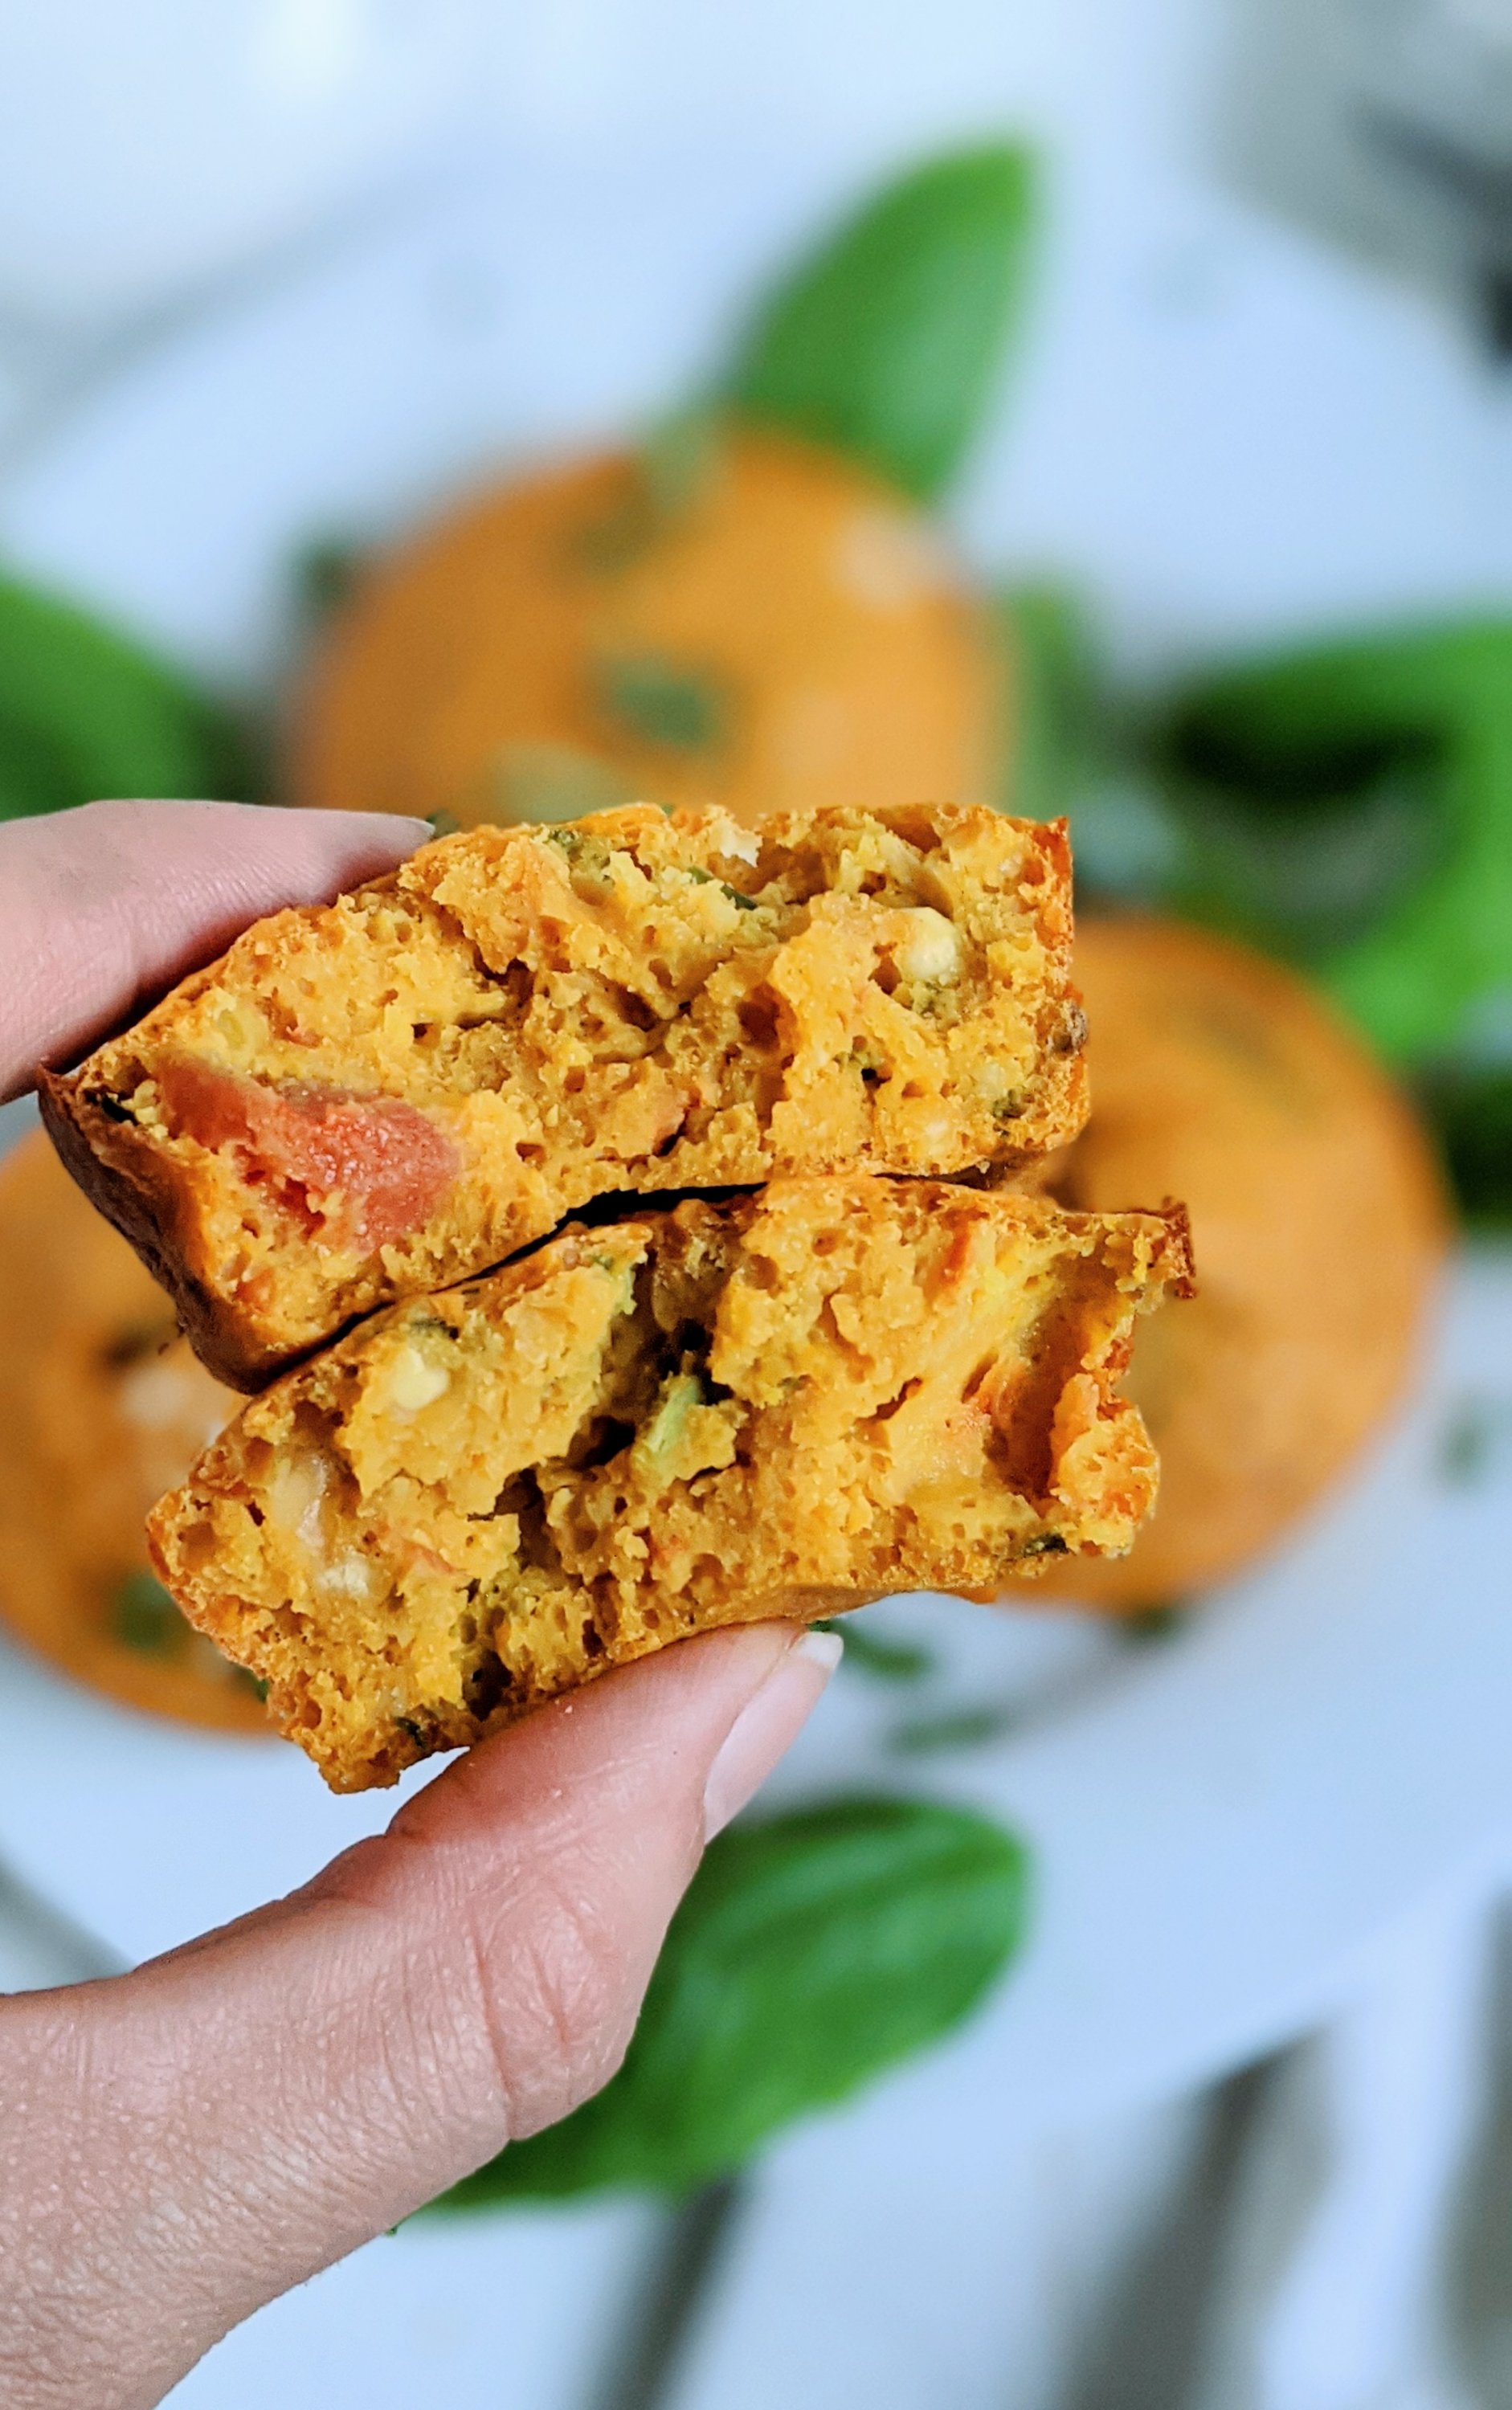 egg free muffins vegan meal prep ideas tomato basil chickpea muffins italian gluten free grain free breakfast recipes meal prep make ahead pantry staple ingredients no eggs no flour no butter